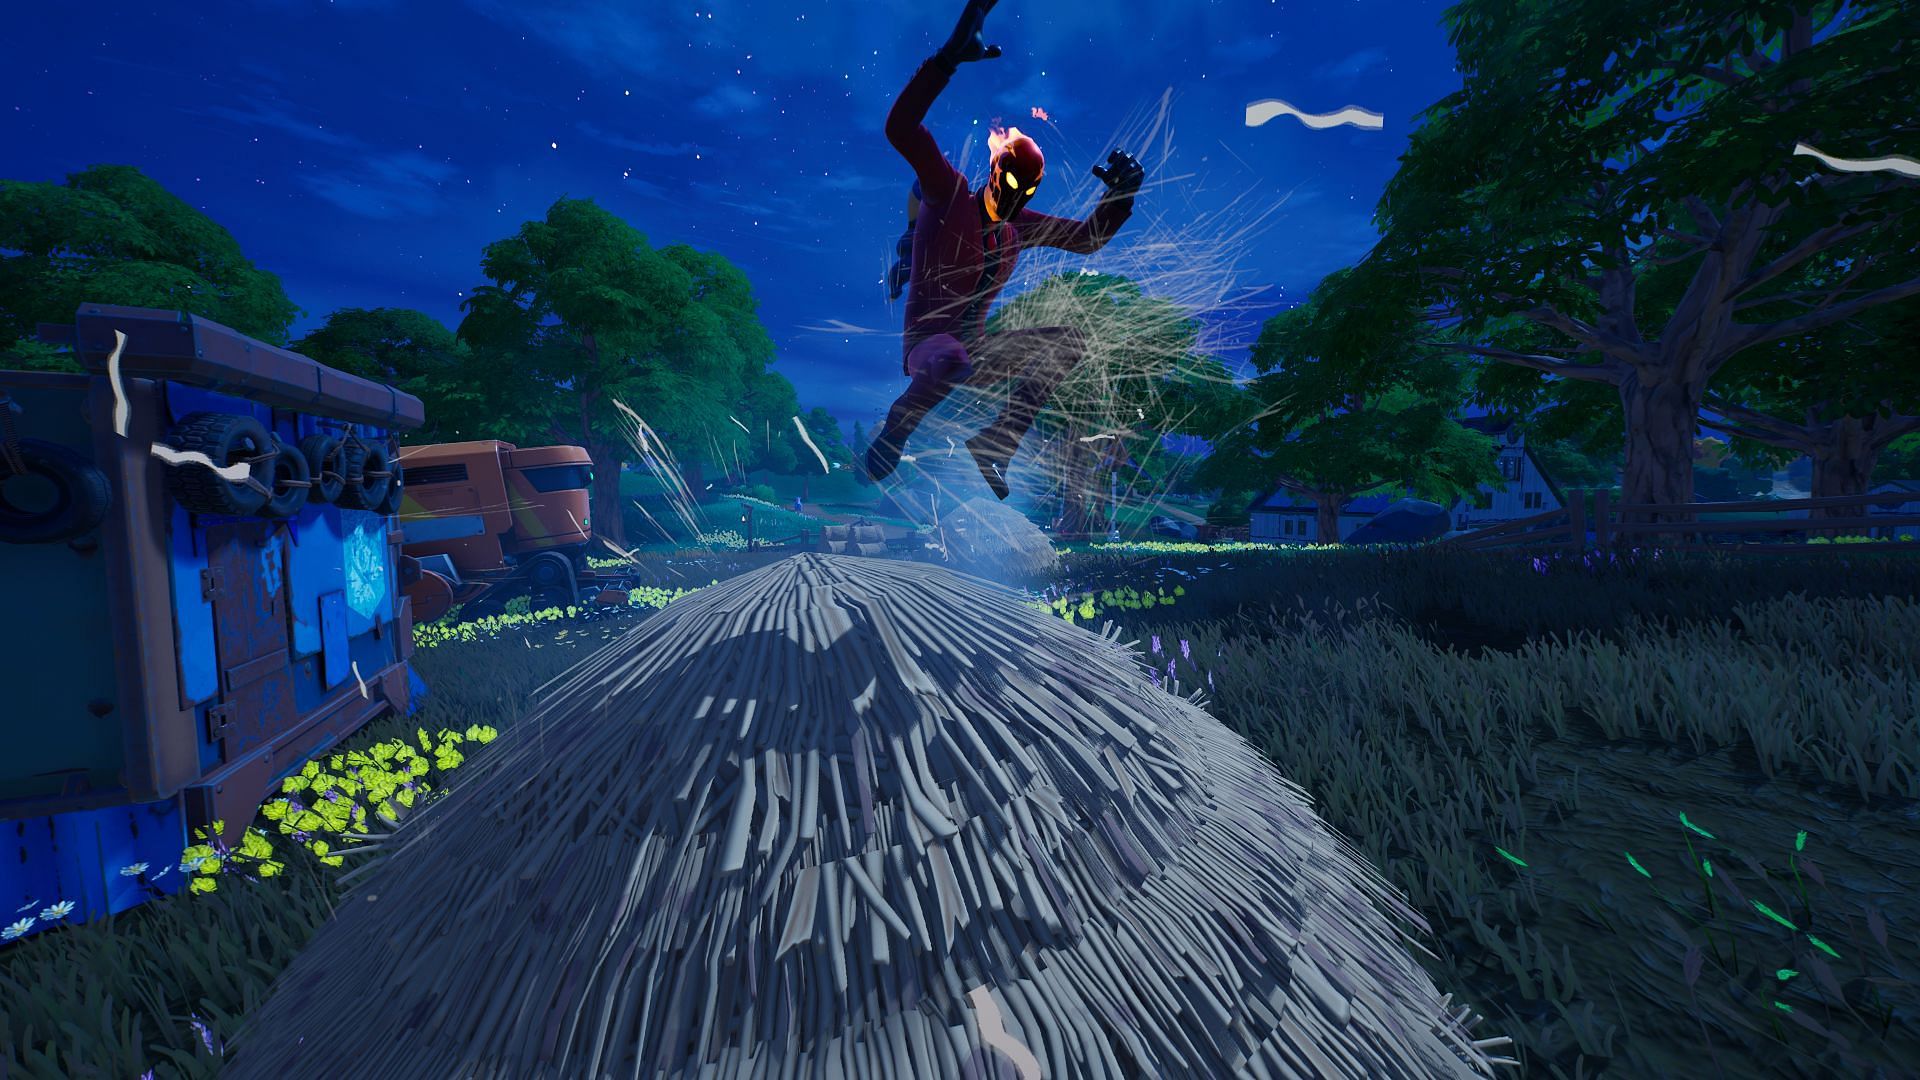 Hide in a Haystack, Dumpster, and Flusher to earn 15,000 XP in Fortnite Chapter 4 Season 4 (Image via Epic Games/Fortnite)